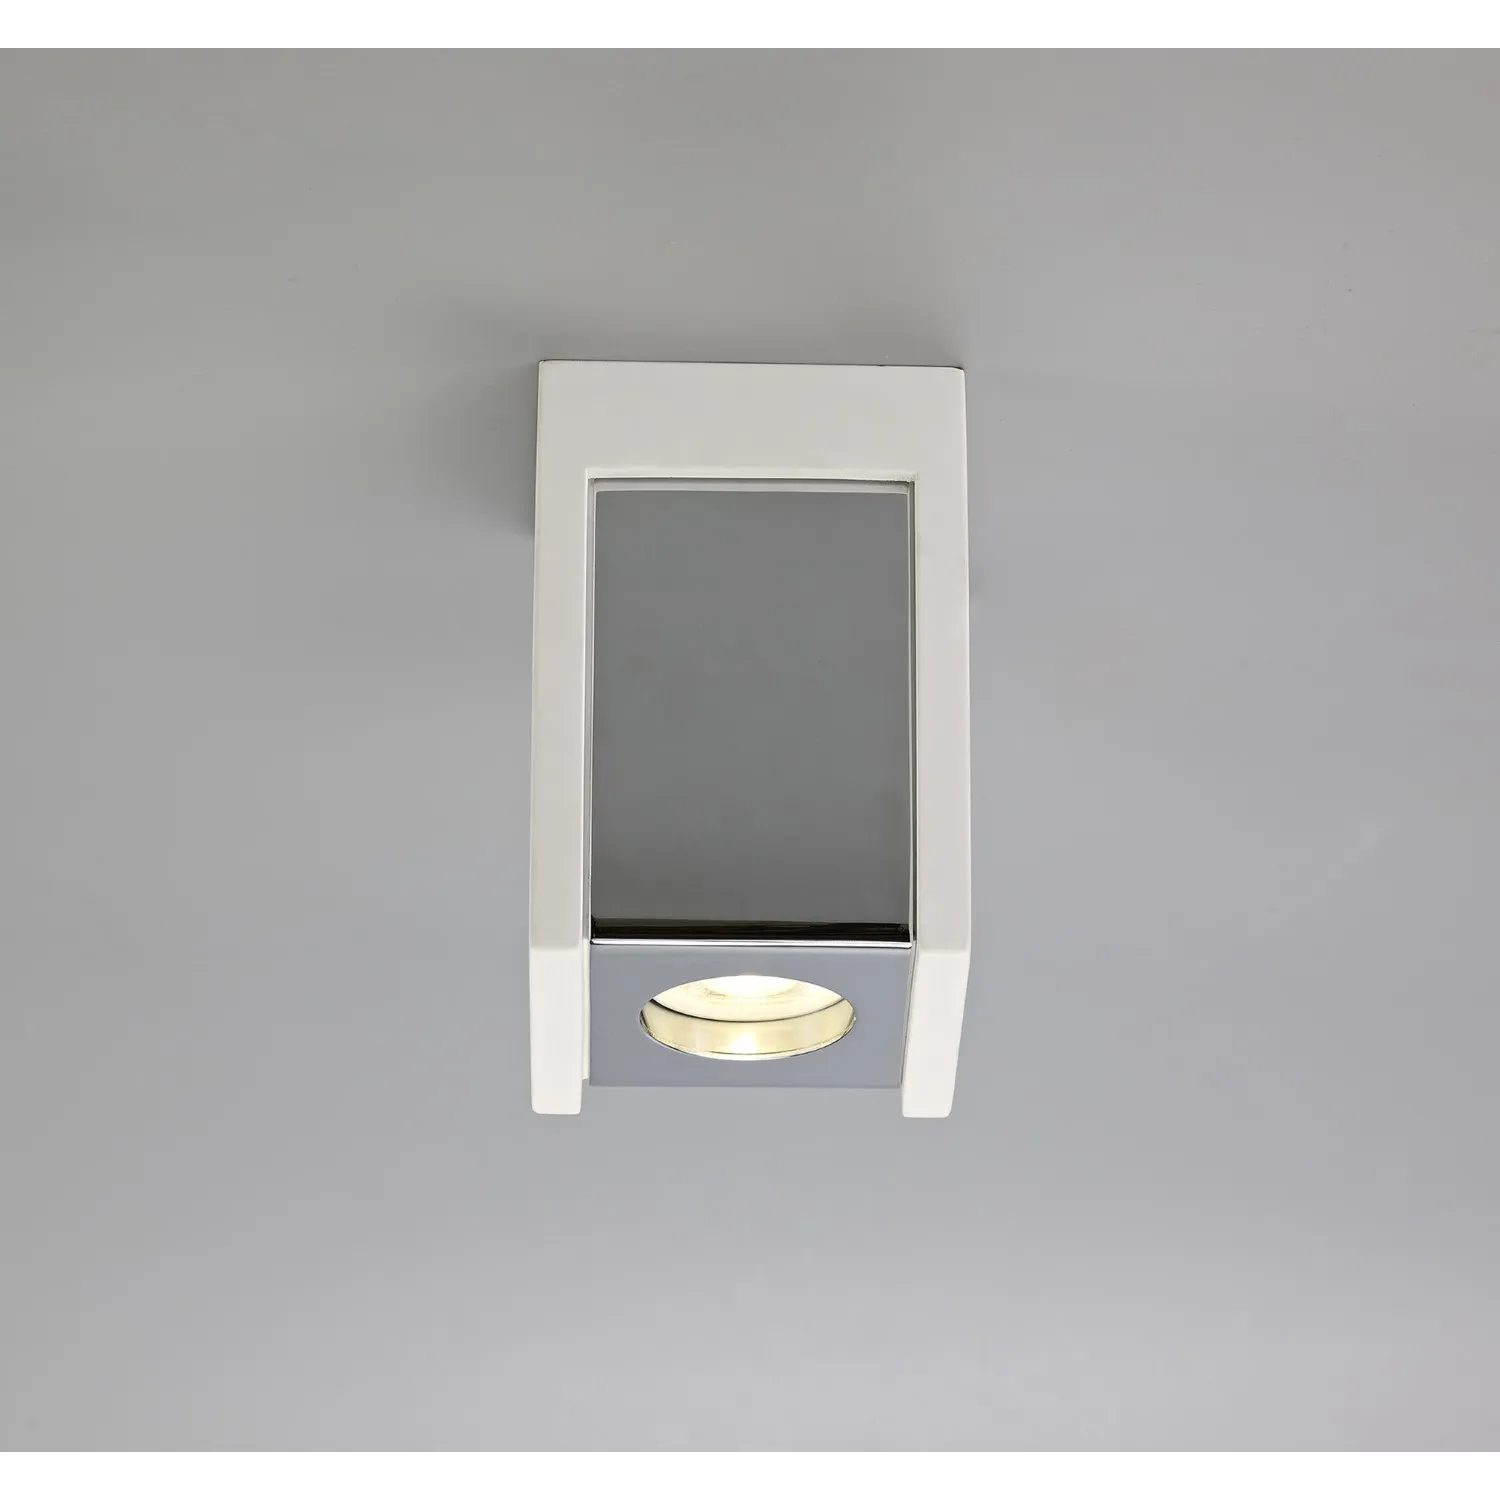 Woking 1 Light Square Ceiling GU10, White Paintable Gypsum With Polished Chrome Cover